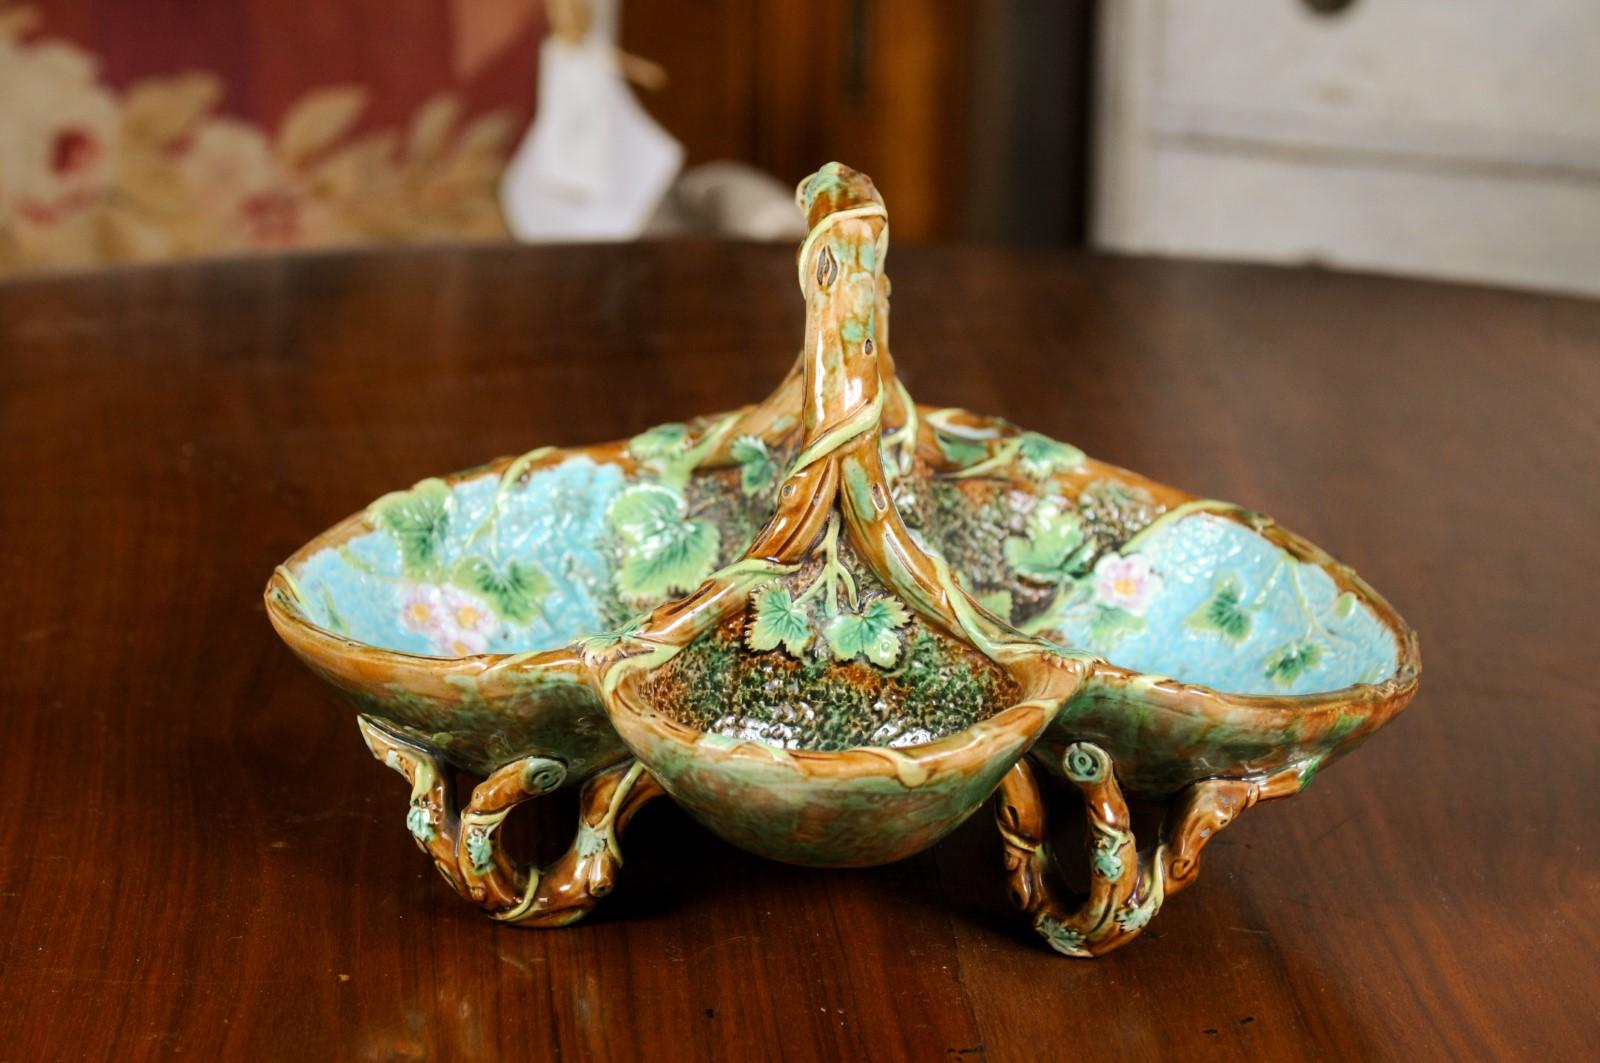 An English Victorian period brown, green and turquoise four-part Majolica porcelain serving bowl from the late 19th century stamped George Jones. Created in England during the 19th century, this Majolica porcelain bowl is made of four parts